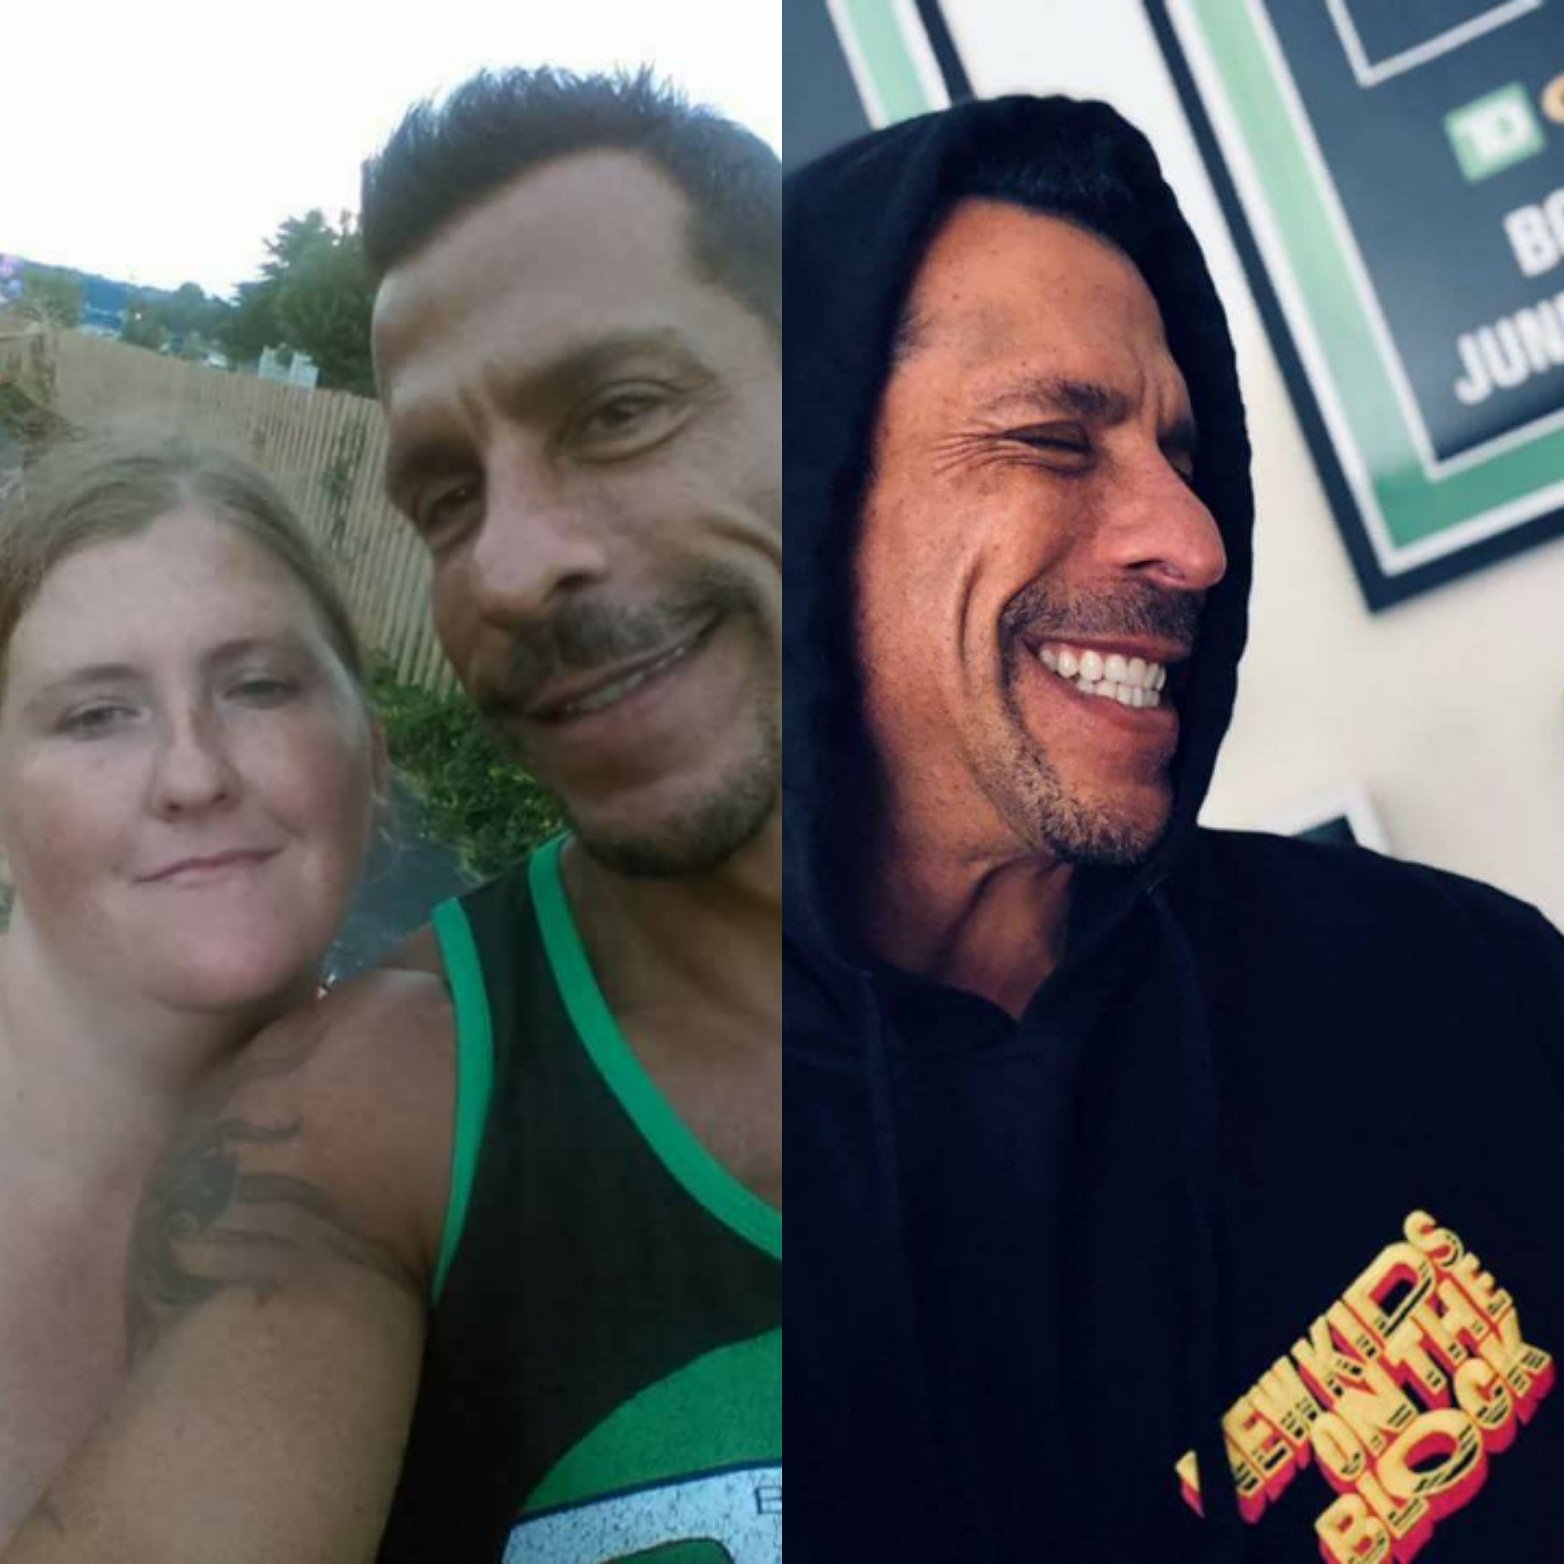 I know he will never see this but still posting it. Happy Birthday Danny wood from new kids on the block 